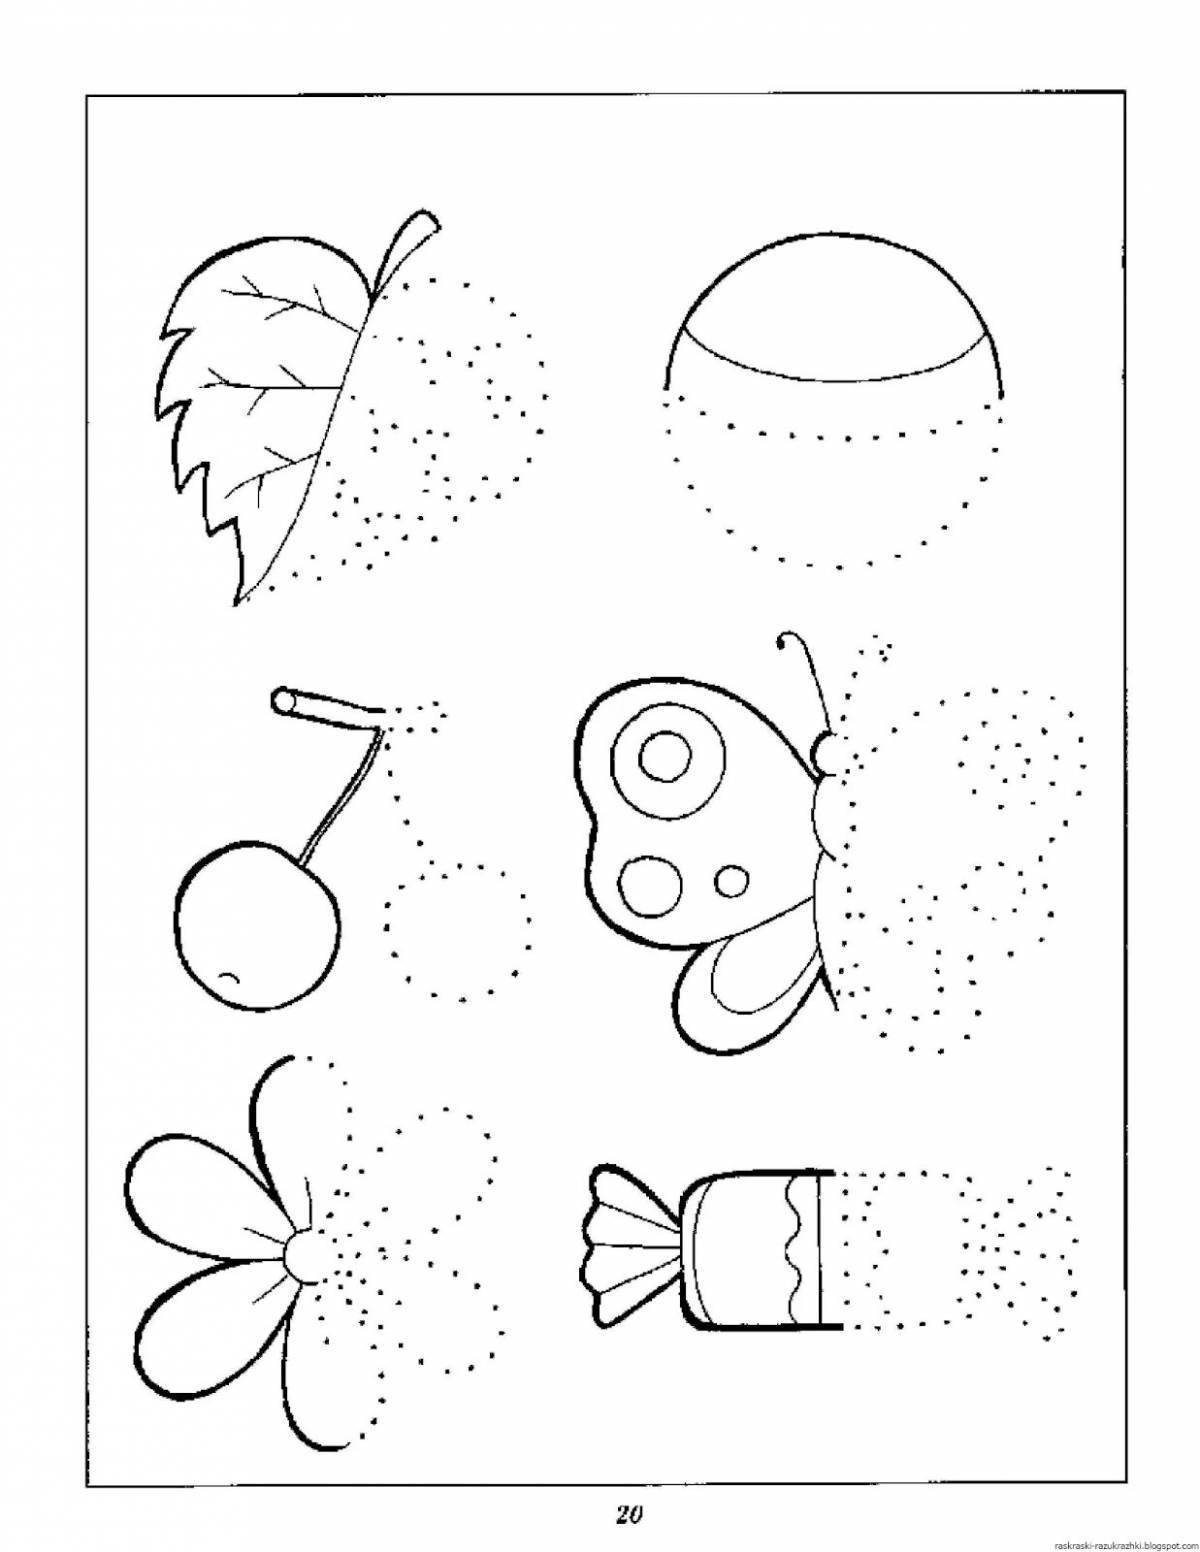 Fun coloring pages for 4-5 year olds